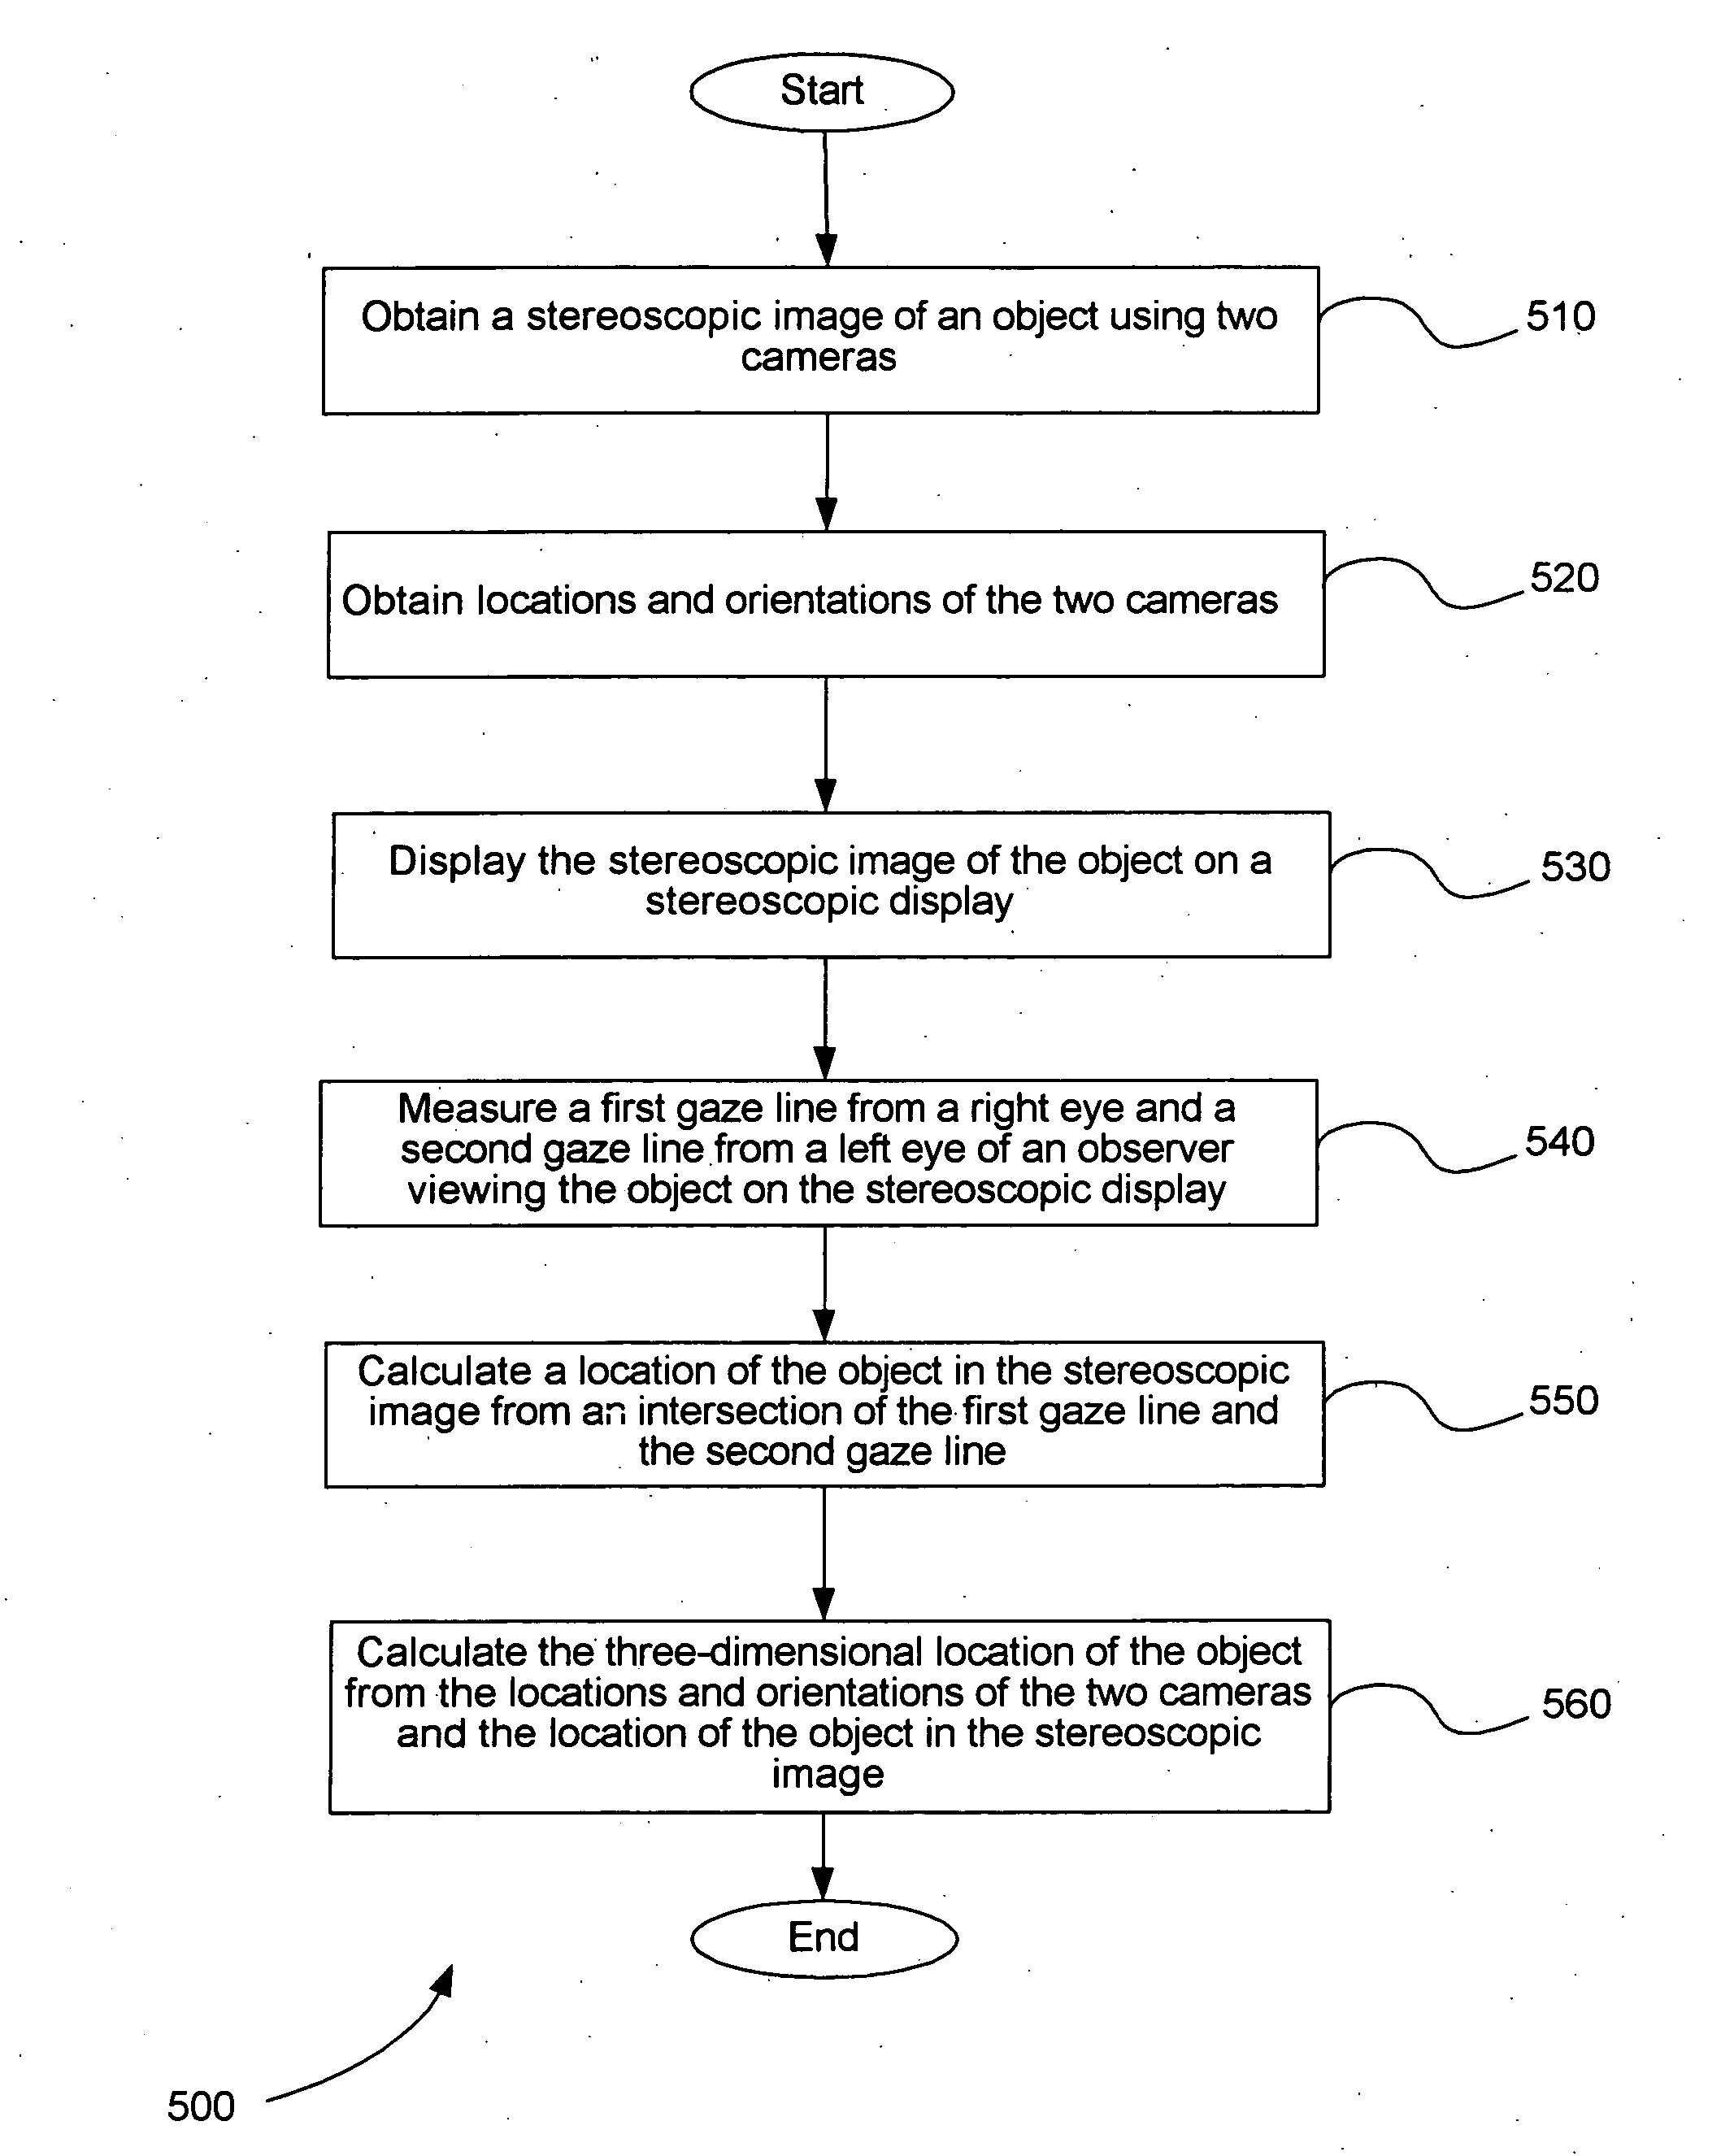 Systems and methods for eye-operated three-dimensional object location